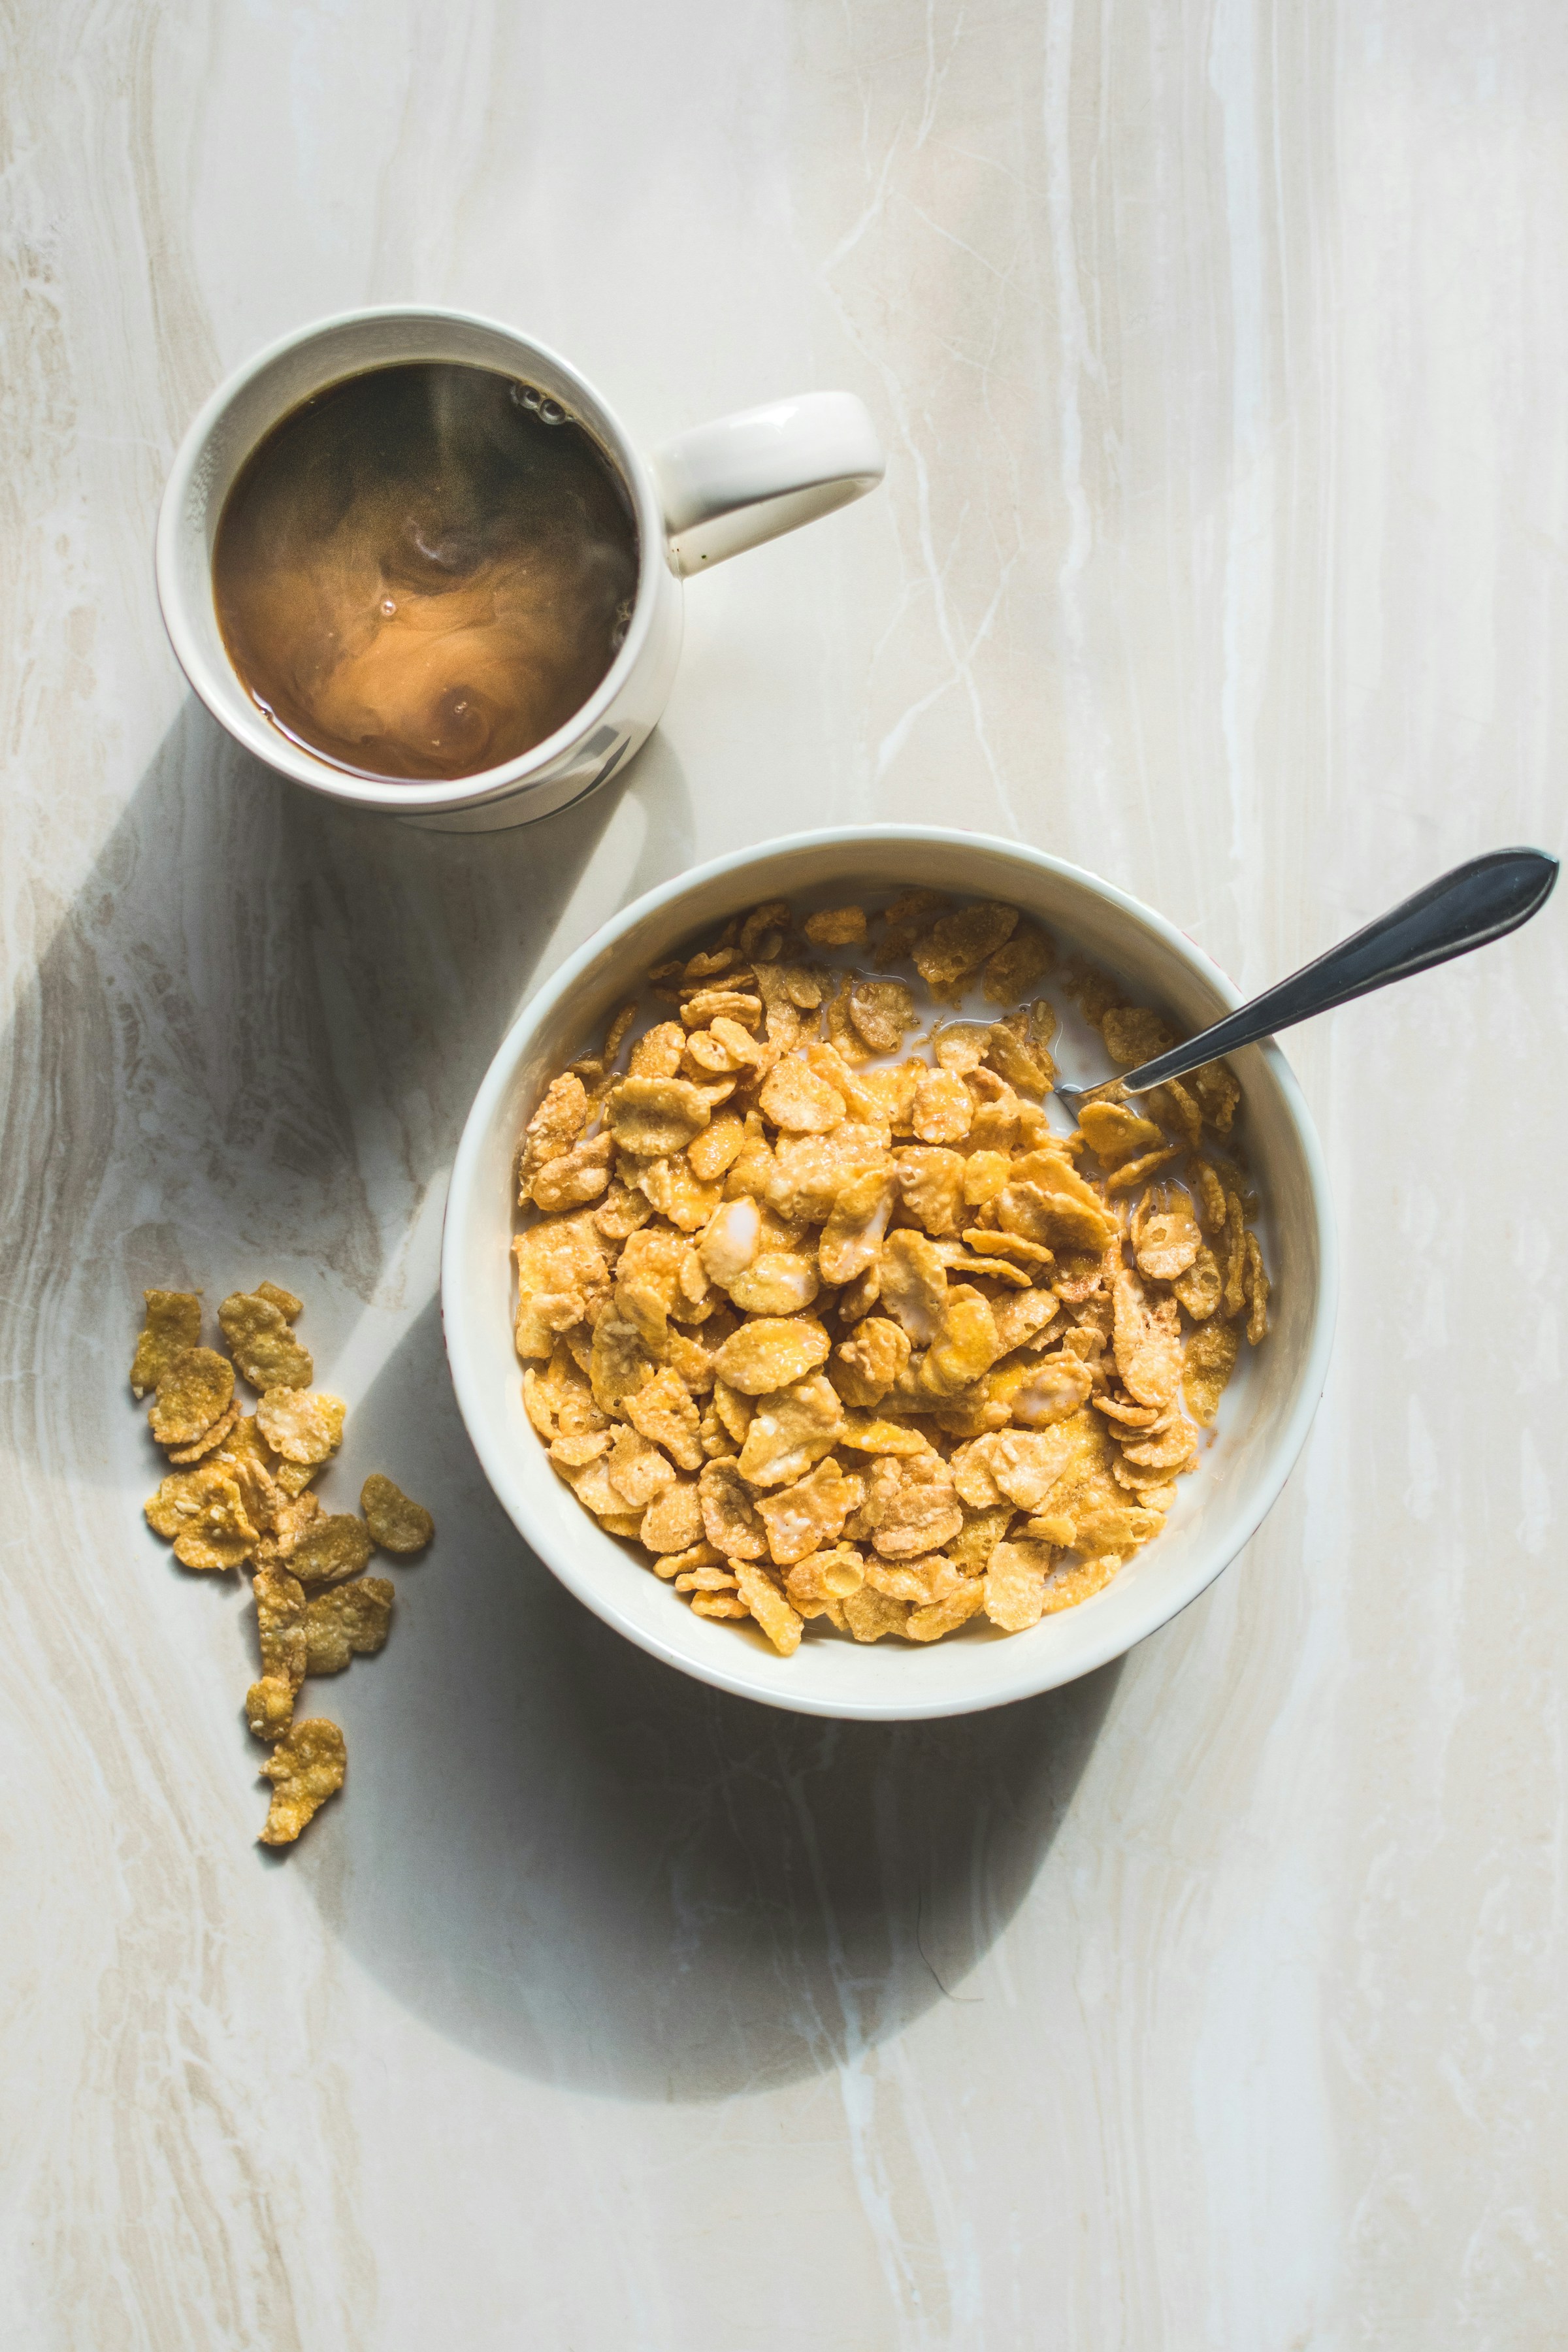 A bowl of cereal and a mug of coffee | Source: Unsplash